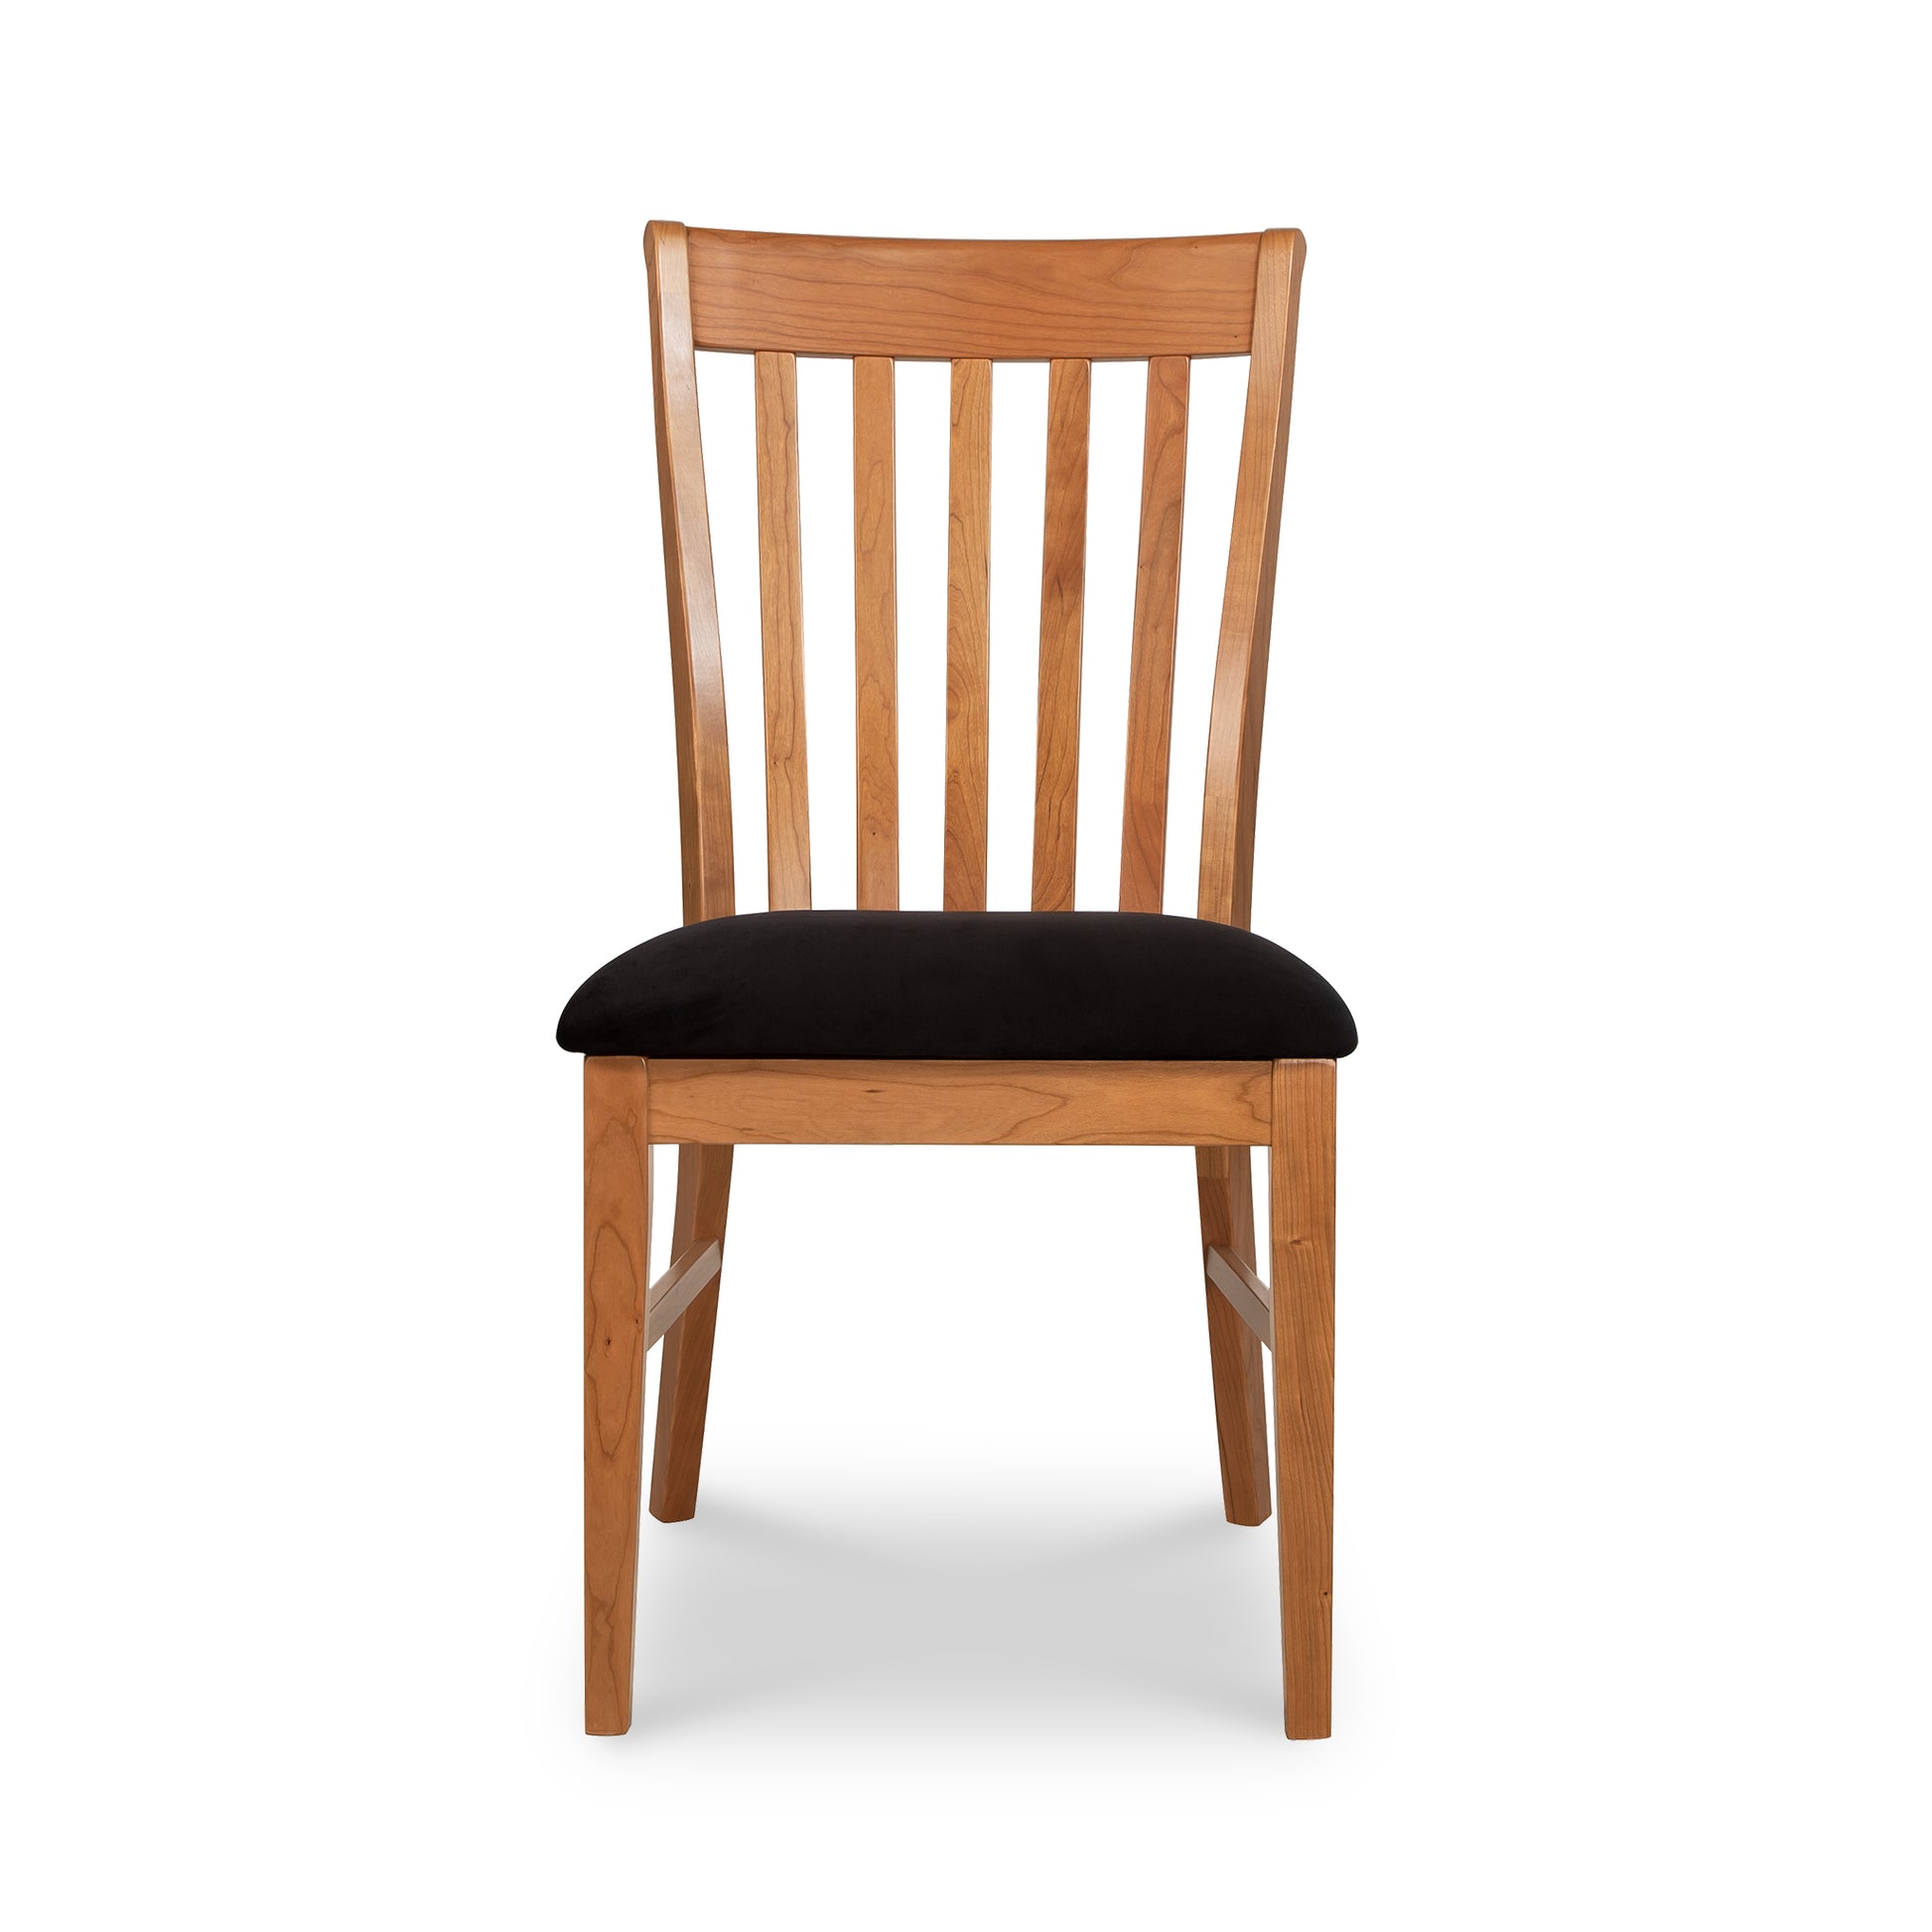 A wooden dining chair with black cushion.